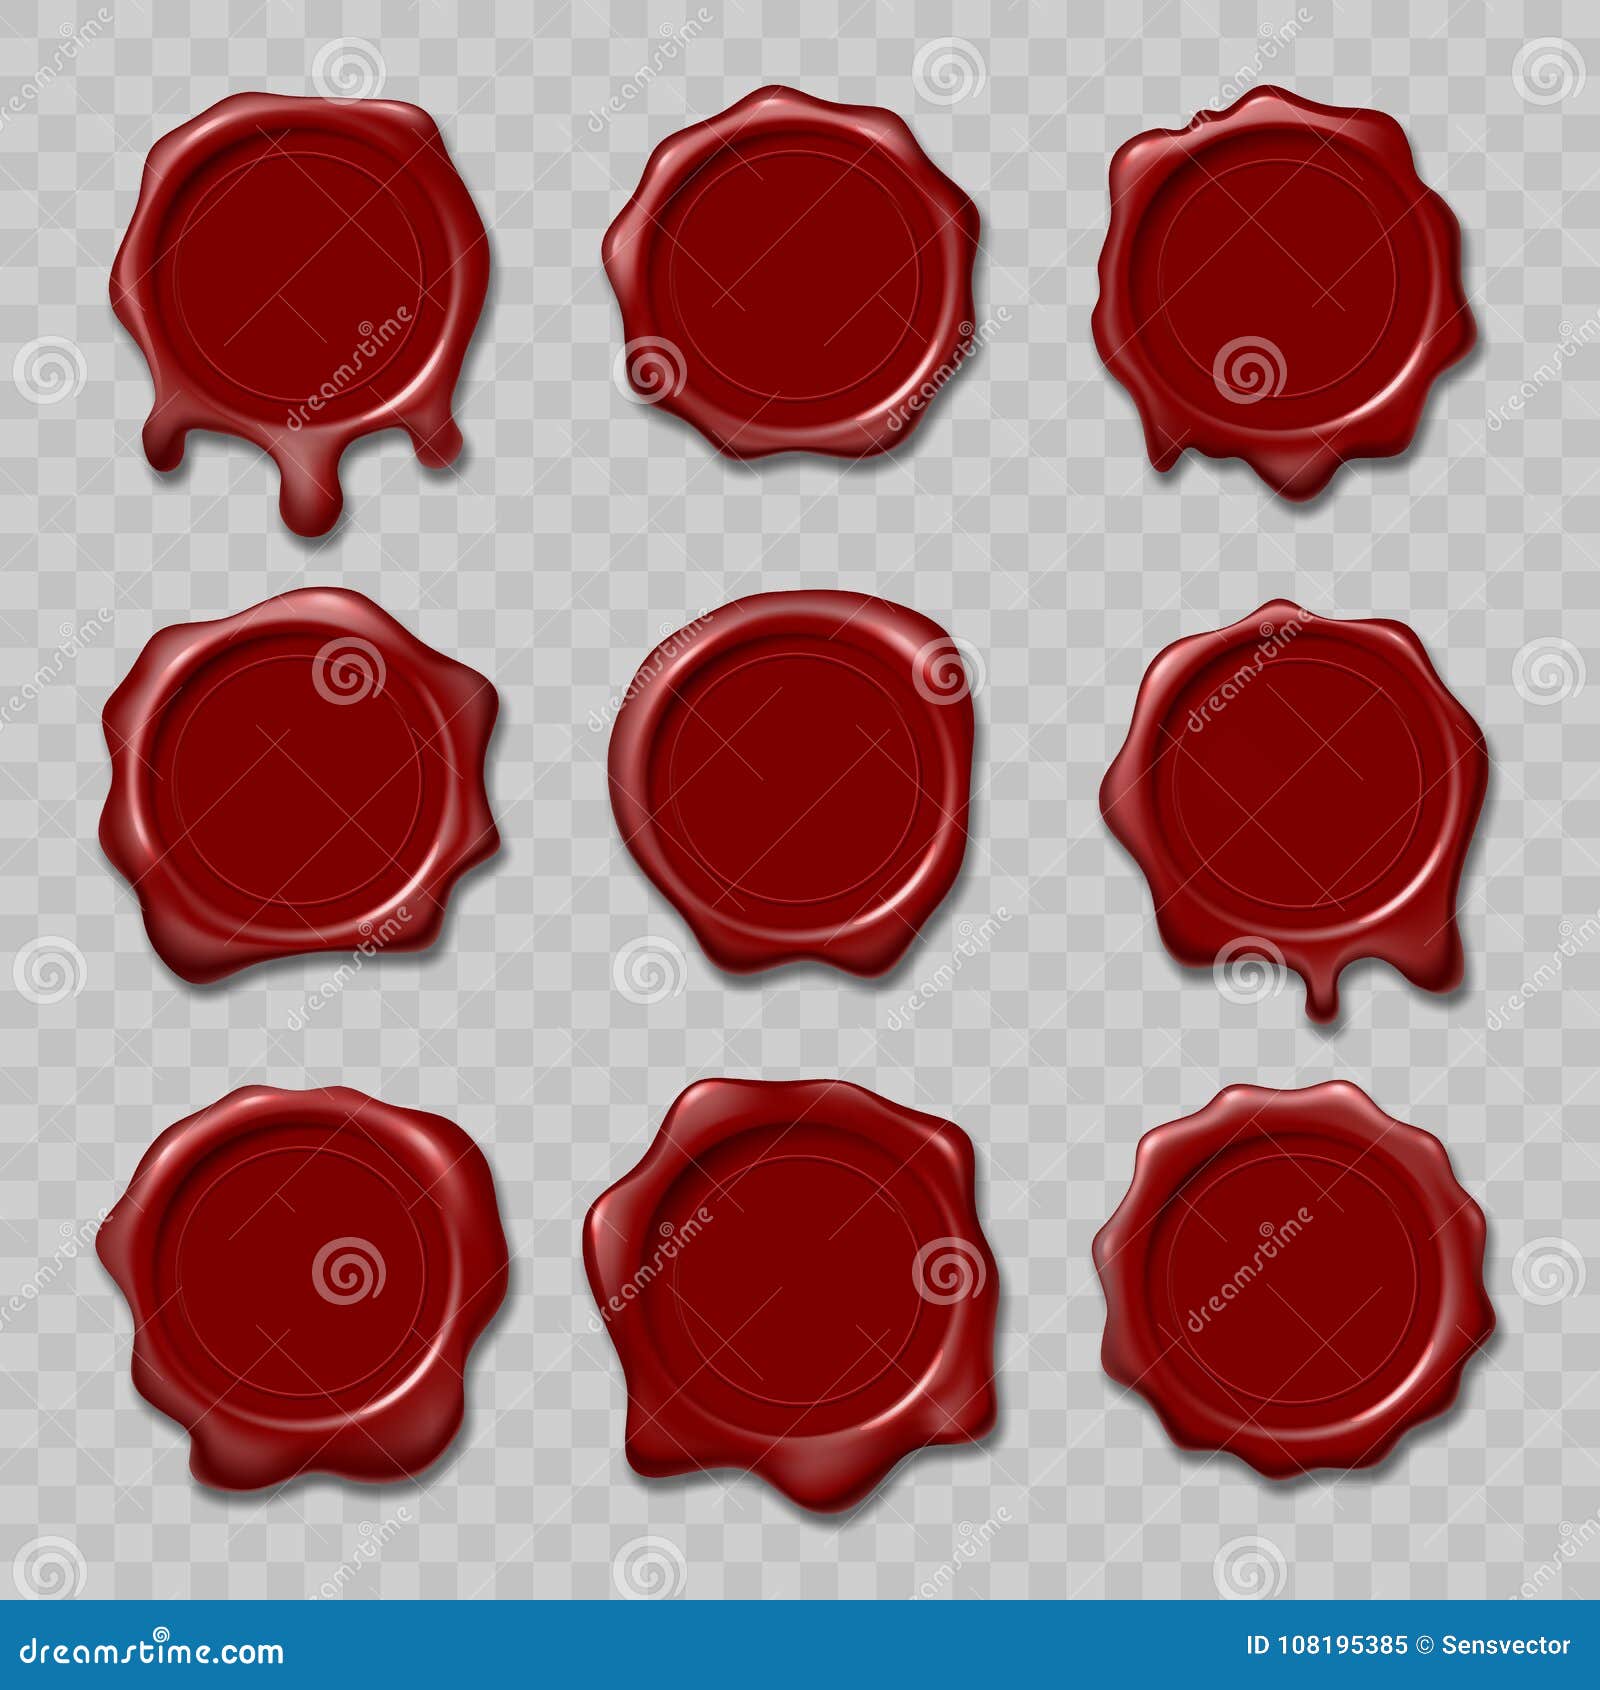 Stamp Wax Seal Vector Icons Set Of Red Sealing Wax Cartoon Stamps